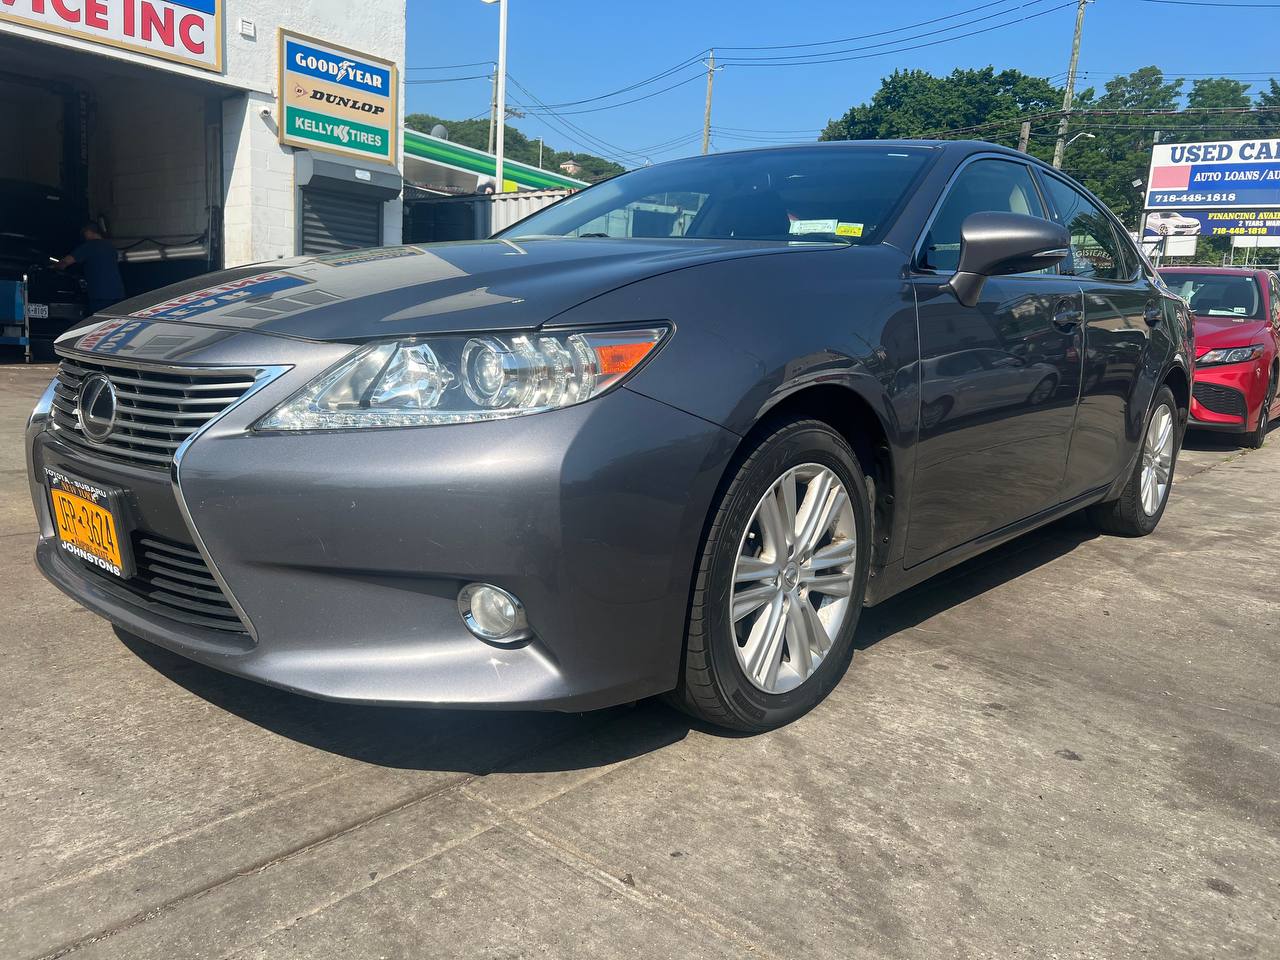 Used Car - 2015 Lexus ES 350 for Sale in Staten Island, NY